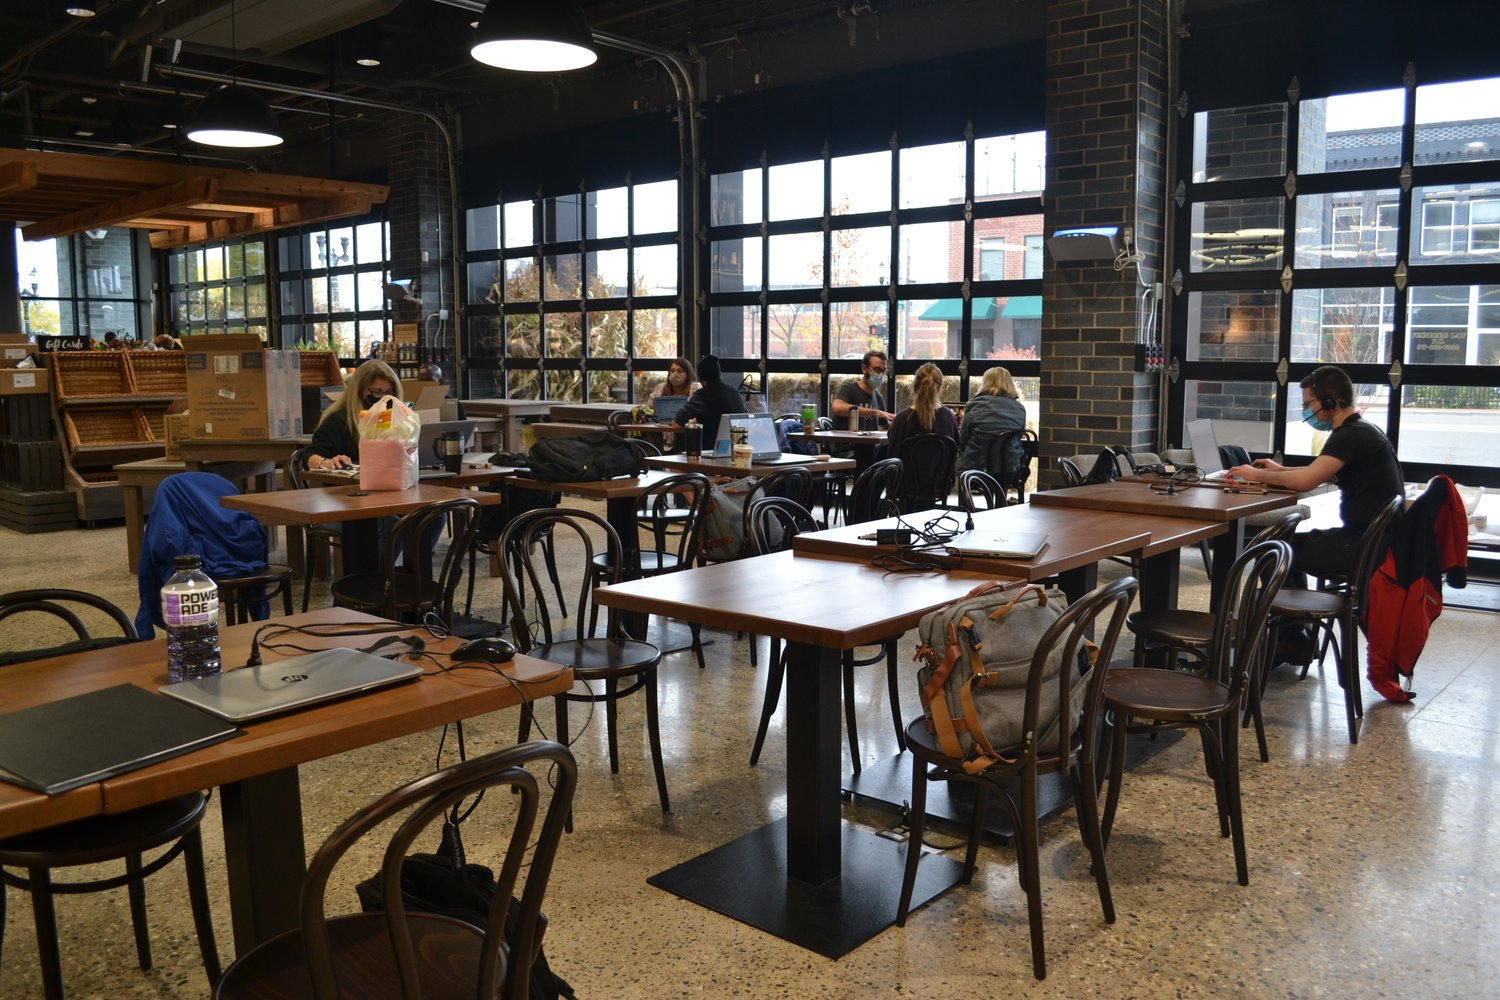 Cafe seating at the Capital City Market. Six garage-style doors will open when the weather permits.